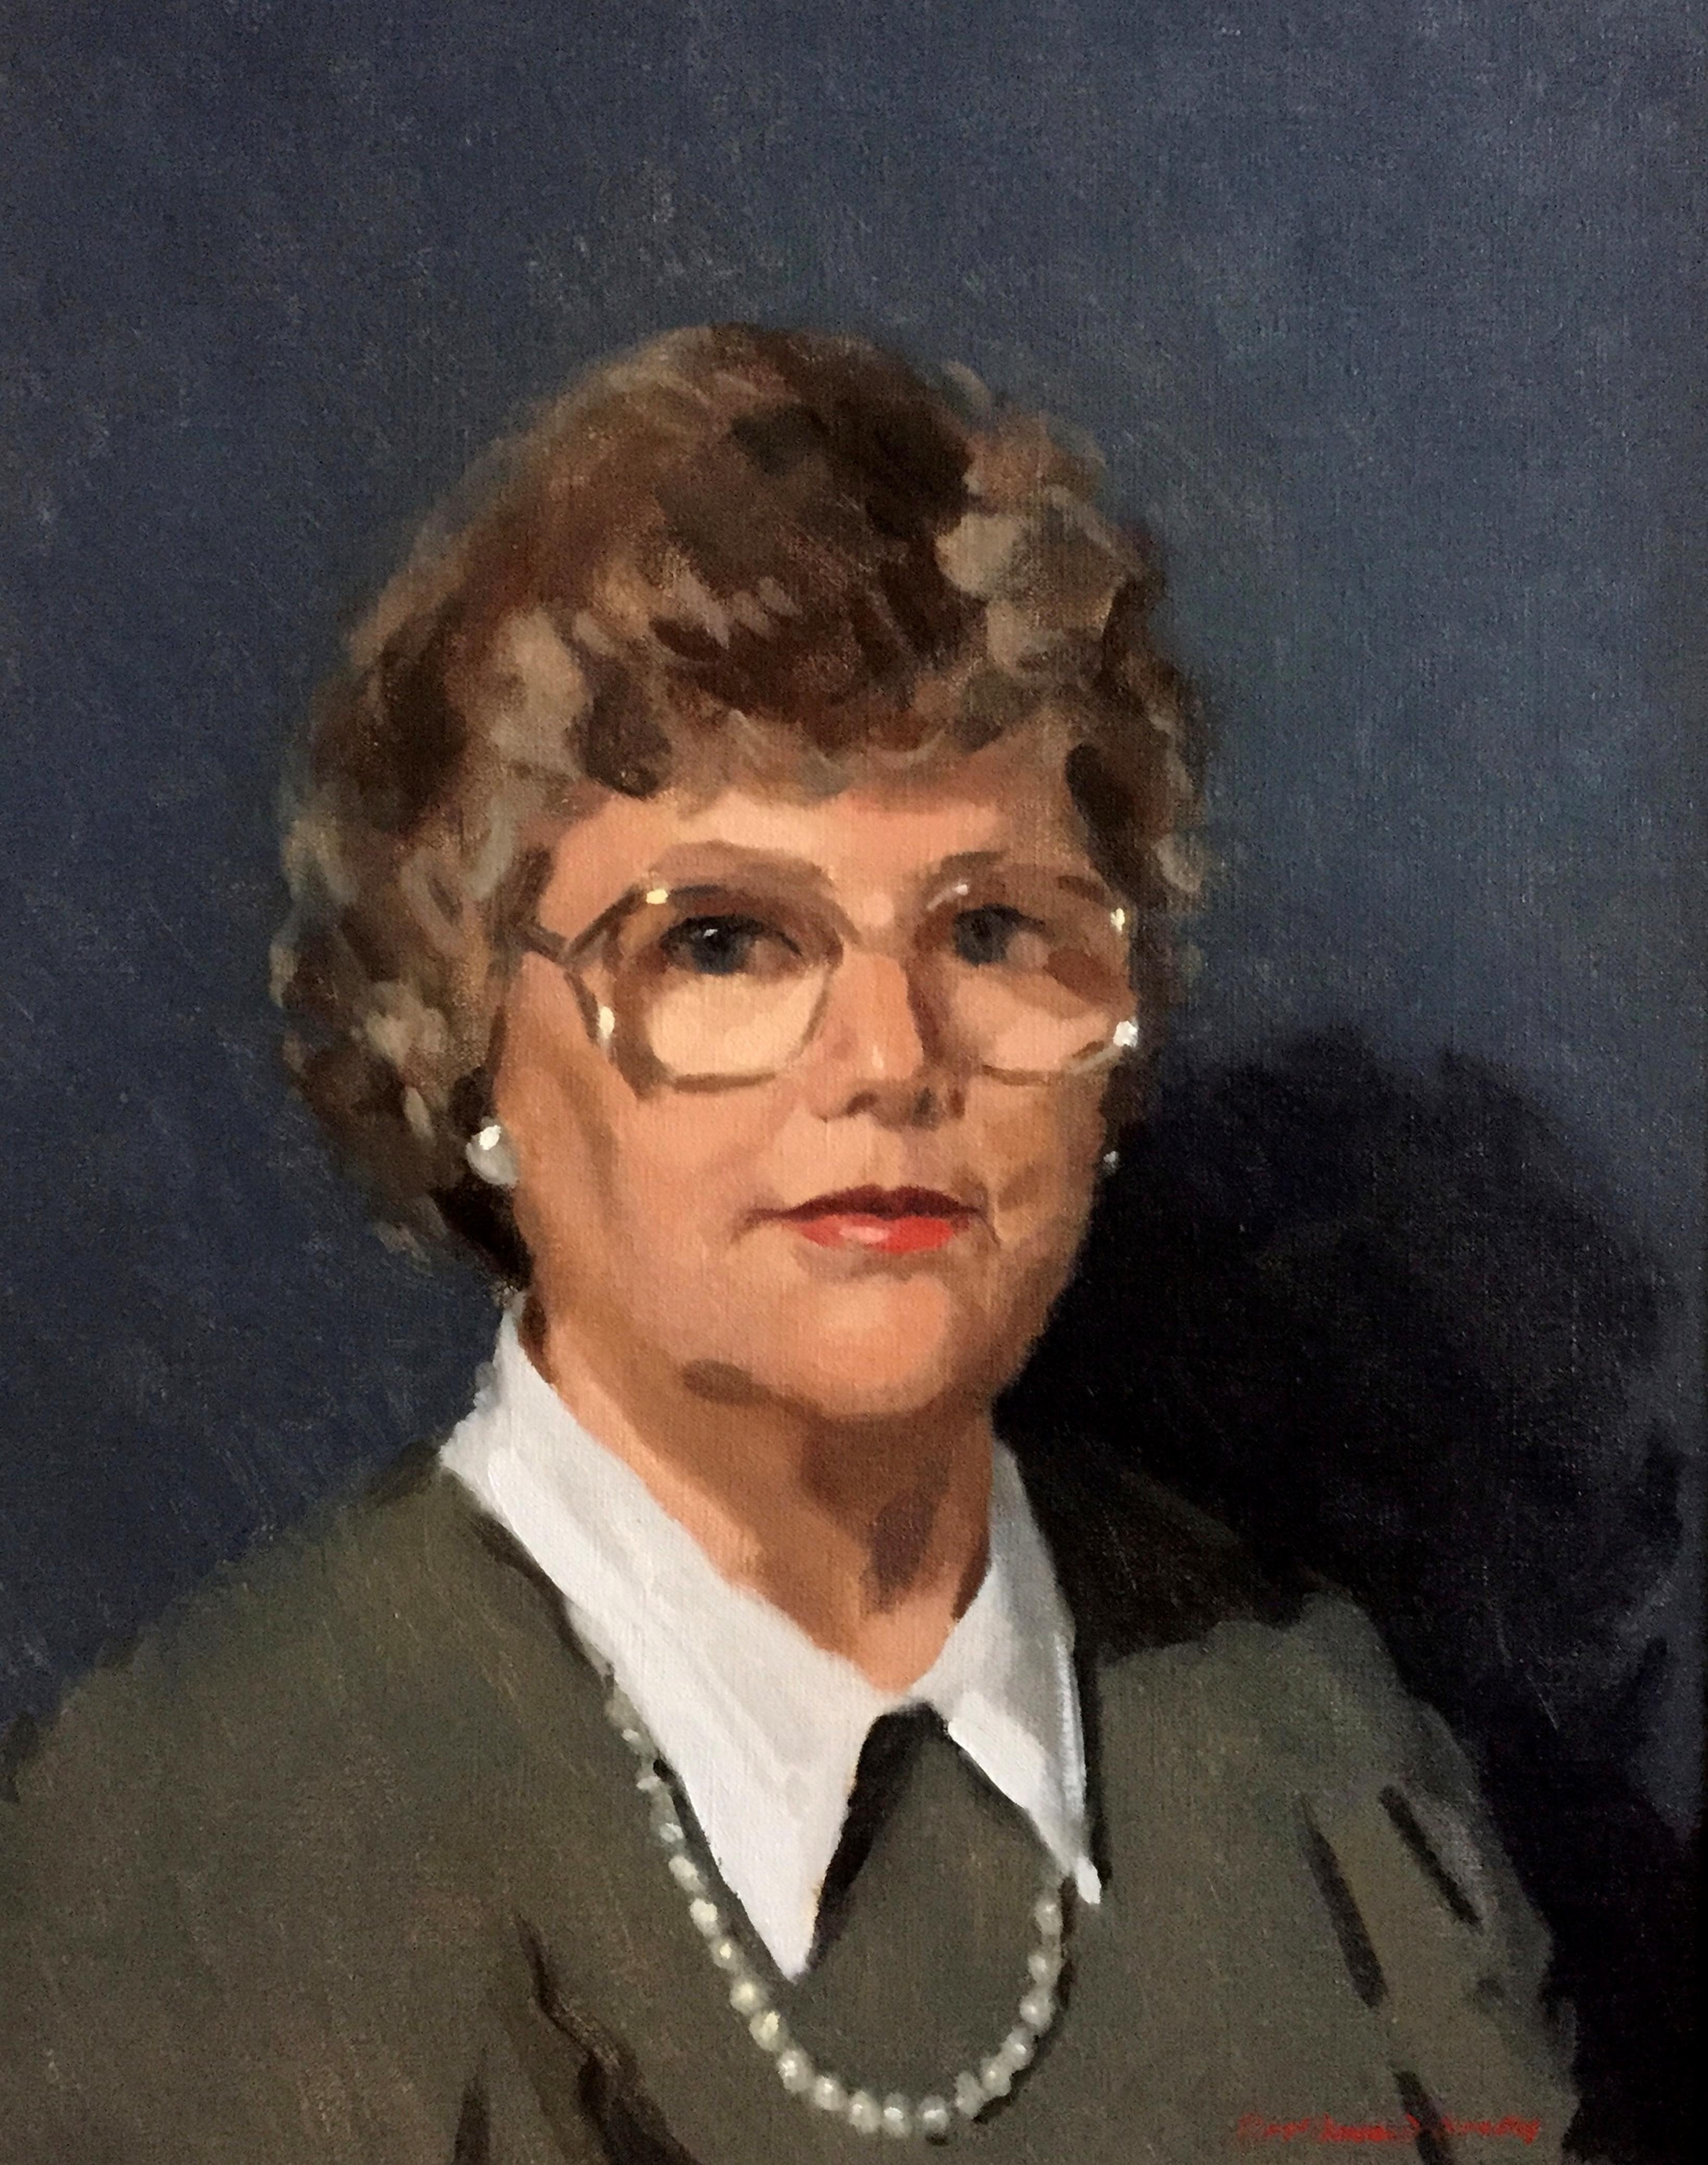 The artist's mother